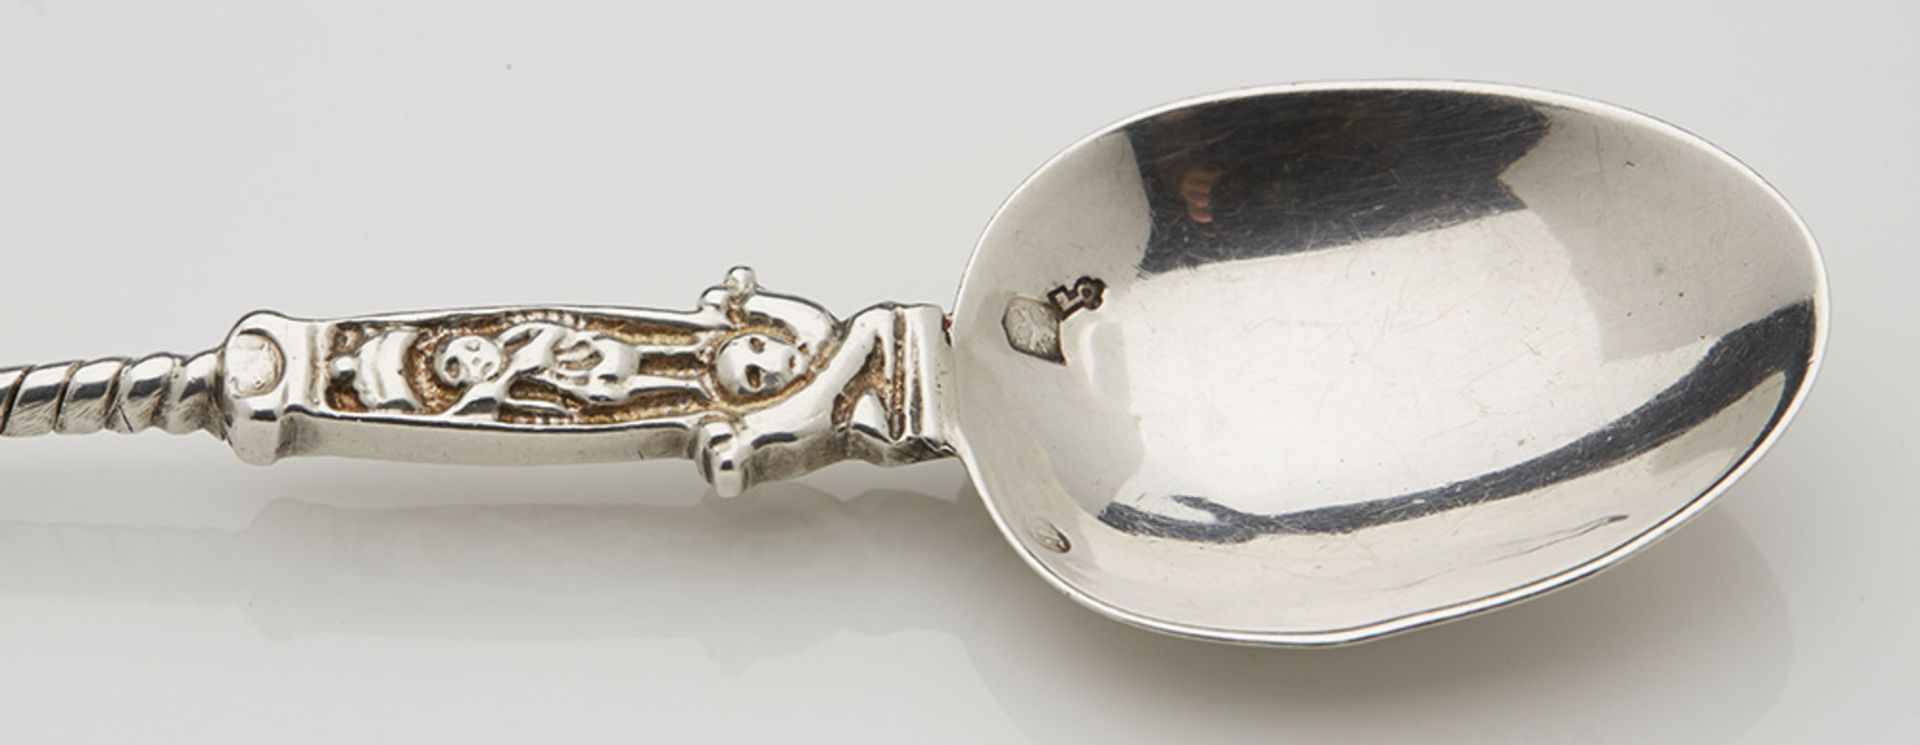 Fine Antique Dutch Silver Export Presentation Spoon With Figural Stem C.1890 - Image 2 of 6